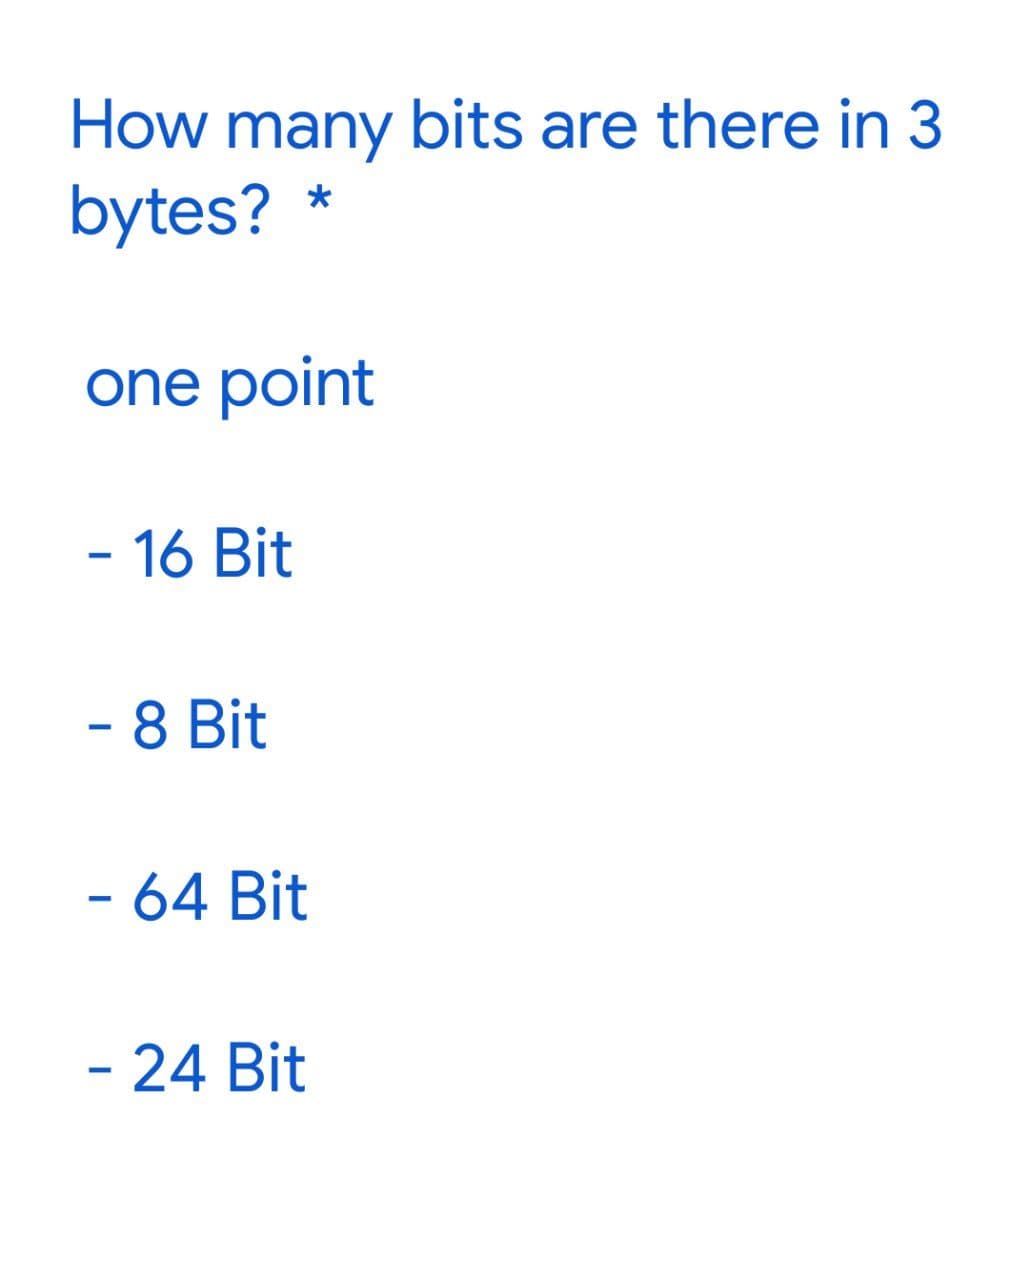 How many bits are there in 3
*
bytes?
one point
- 16 Bit
- 8 Bit
- 64 Bit
- 24 Bit